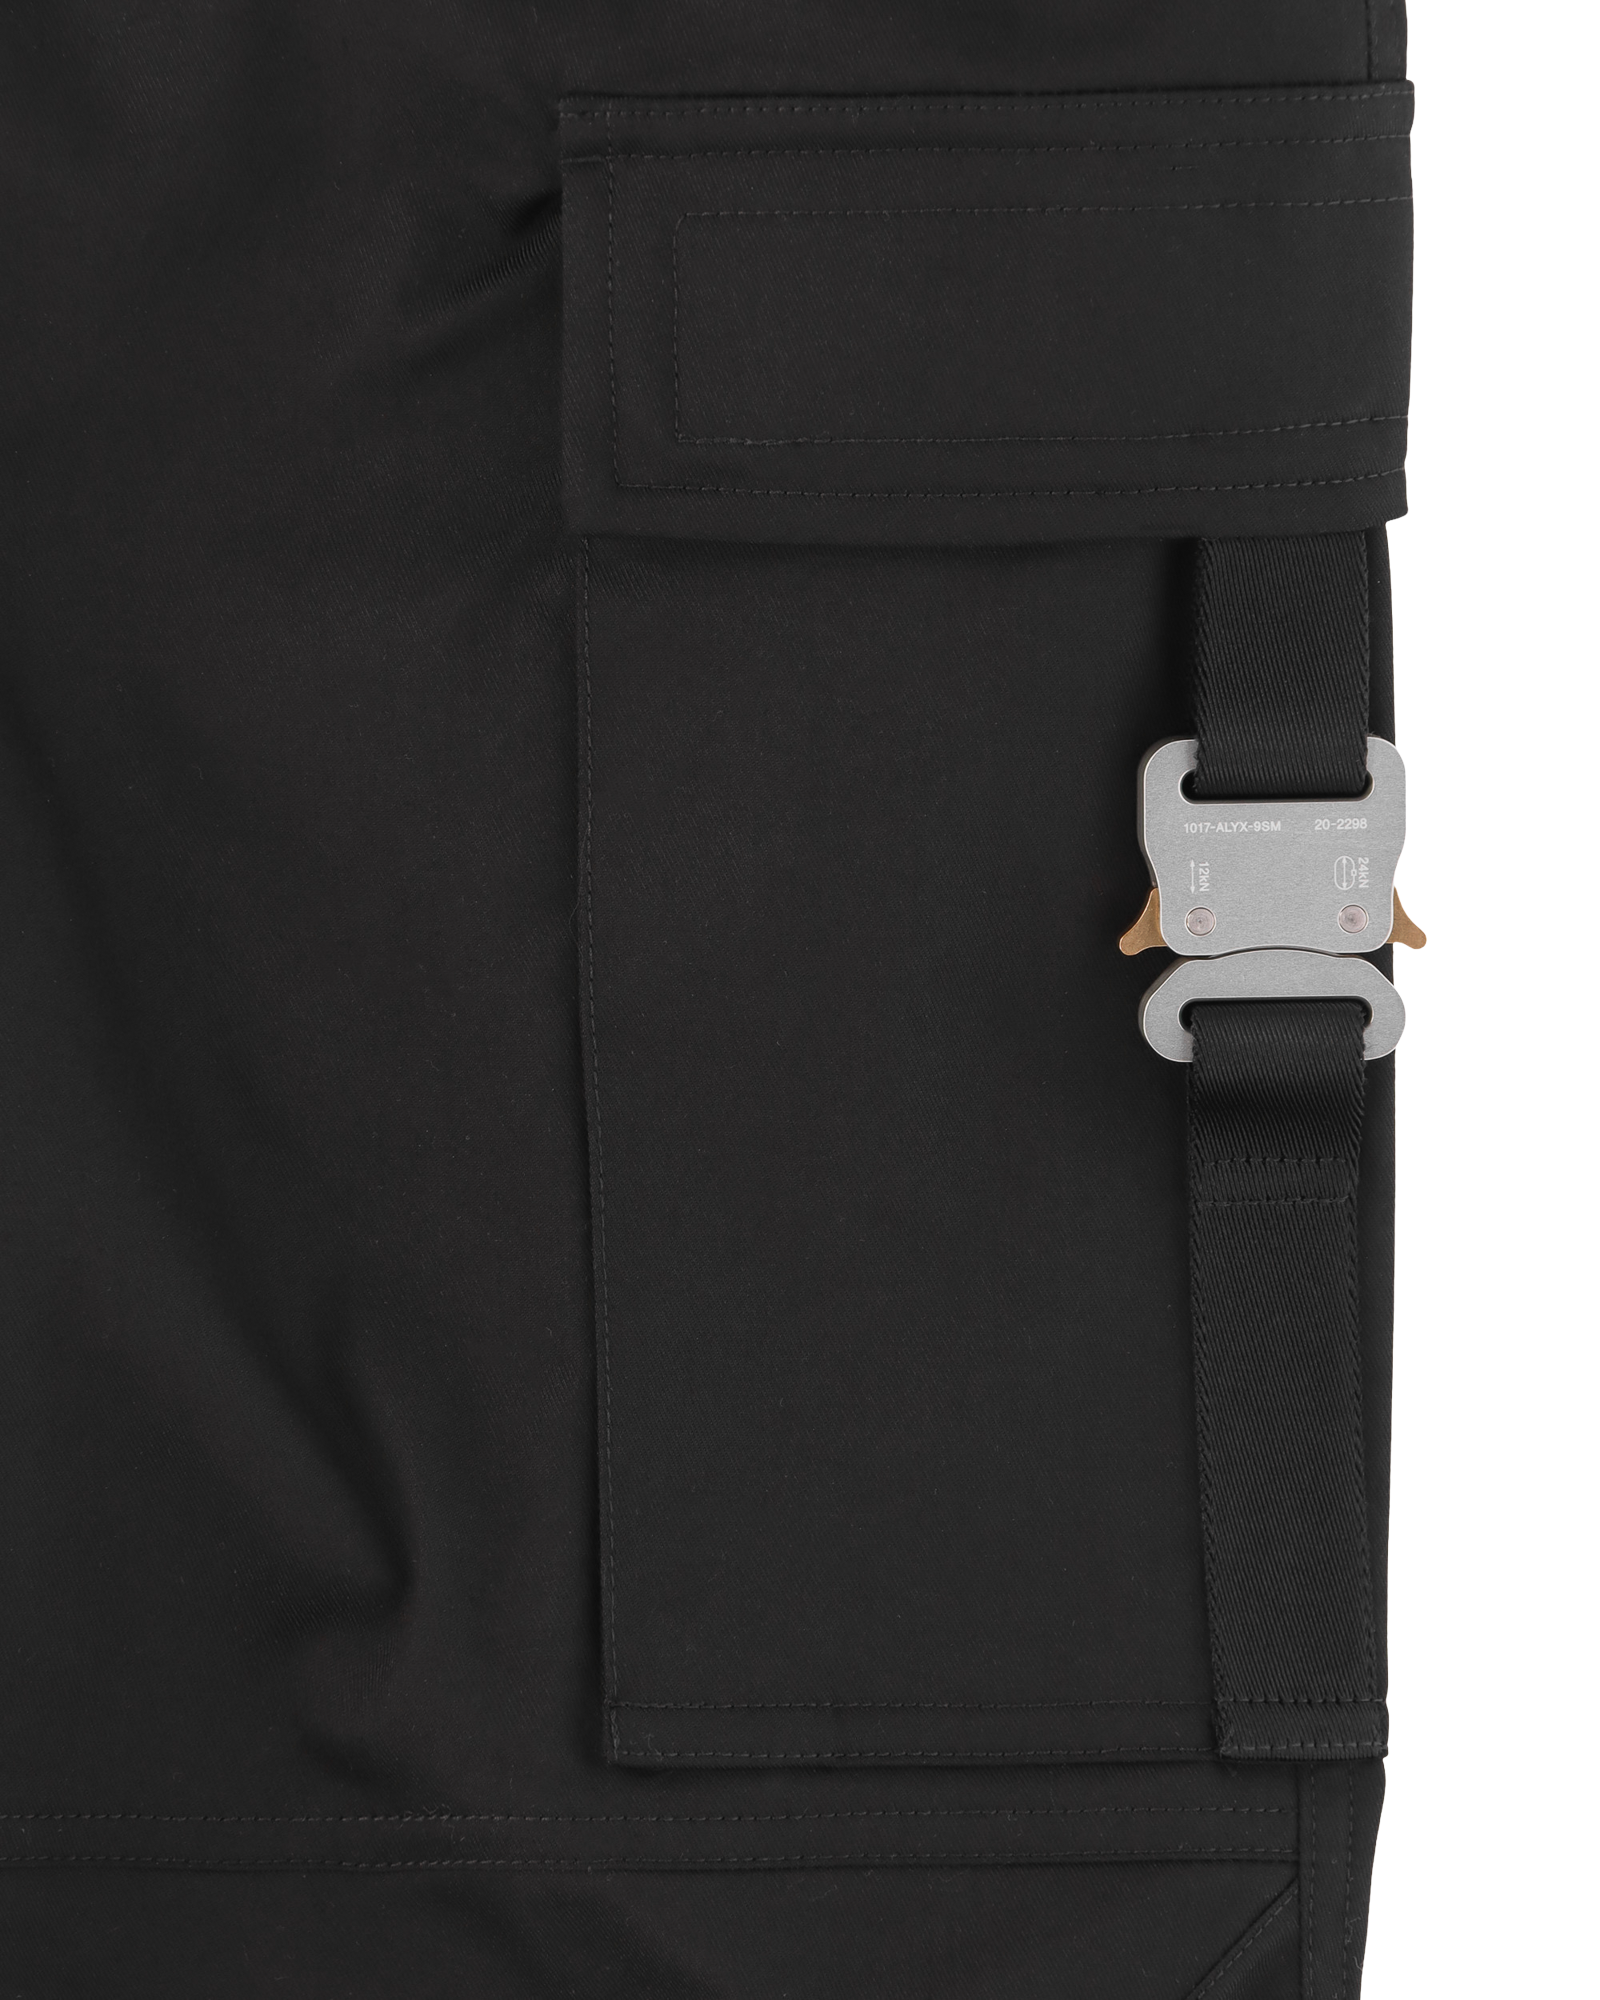 BUCKLE TACTICAL PANT